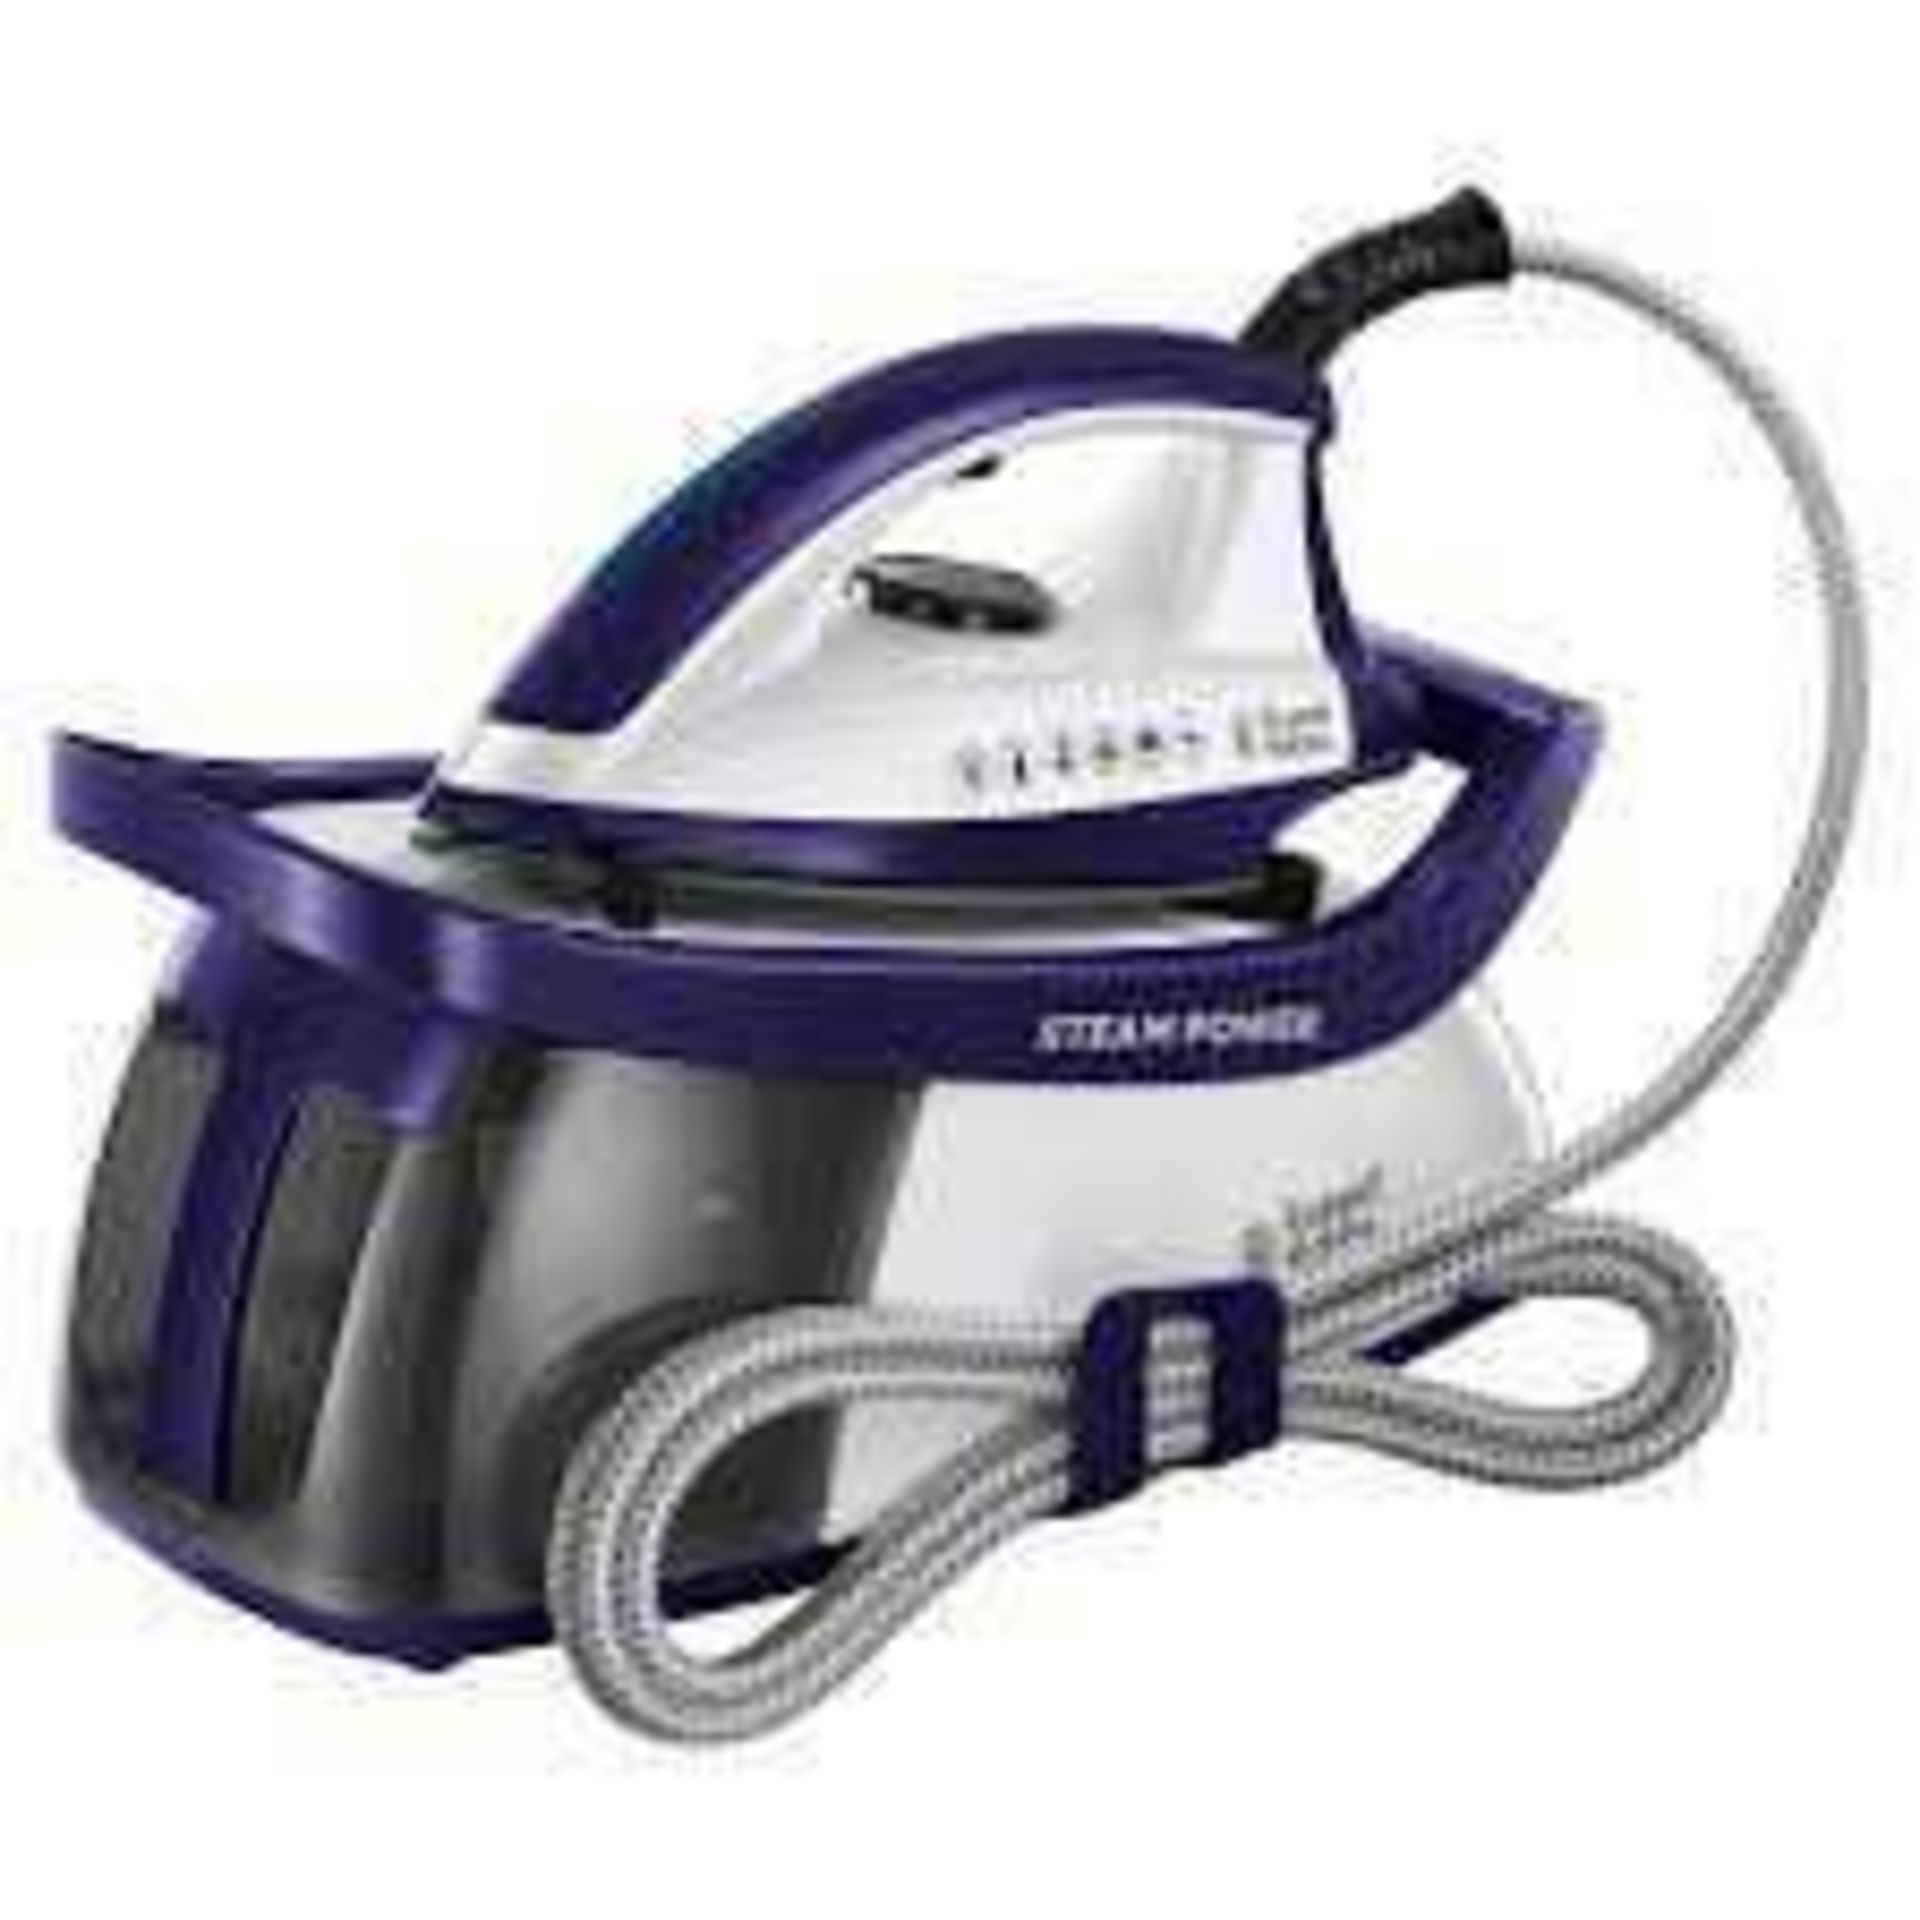 RRP £80 Boxed Russell Hobbs Steam Power Steam Generator Iron (Untested)